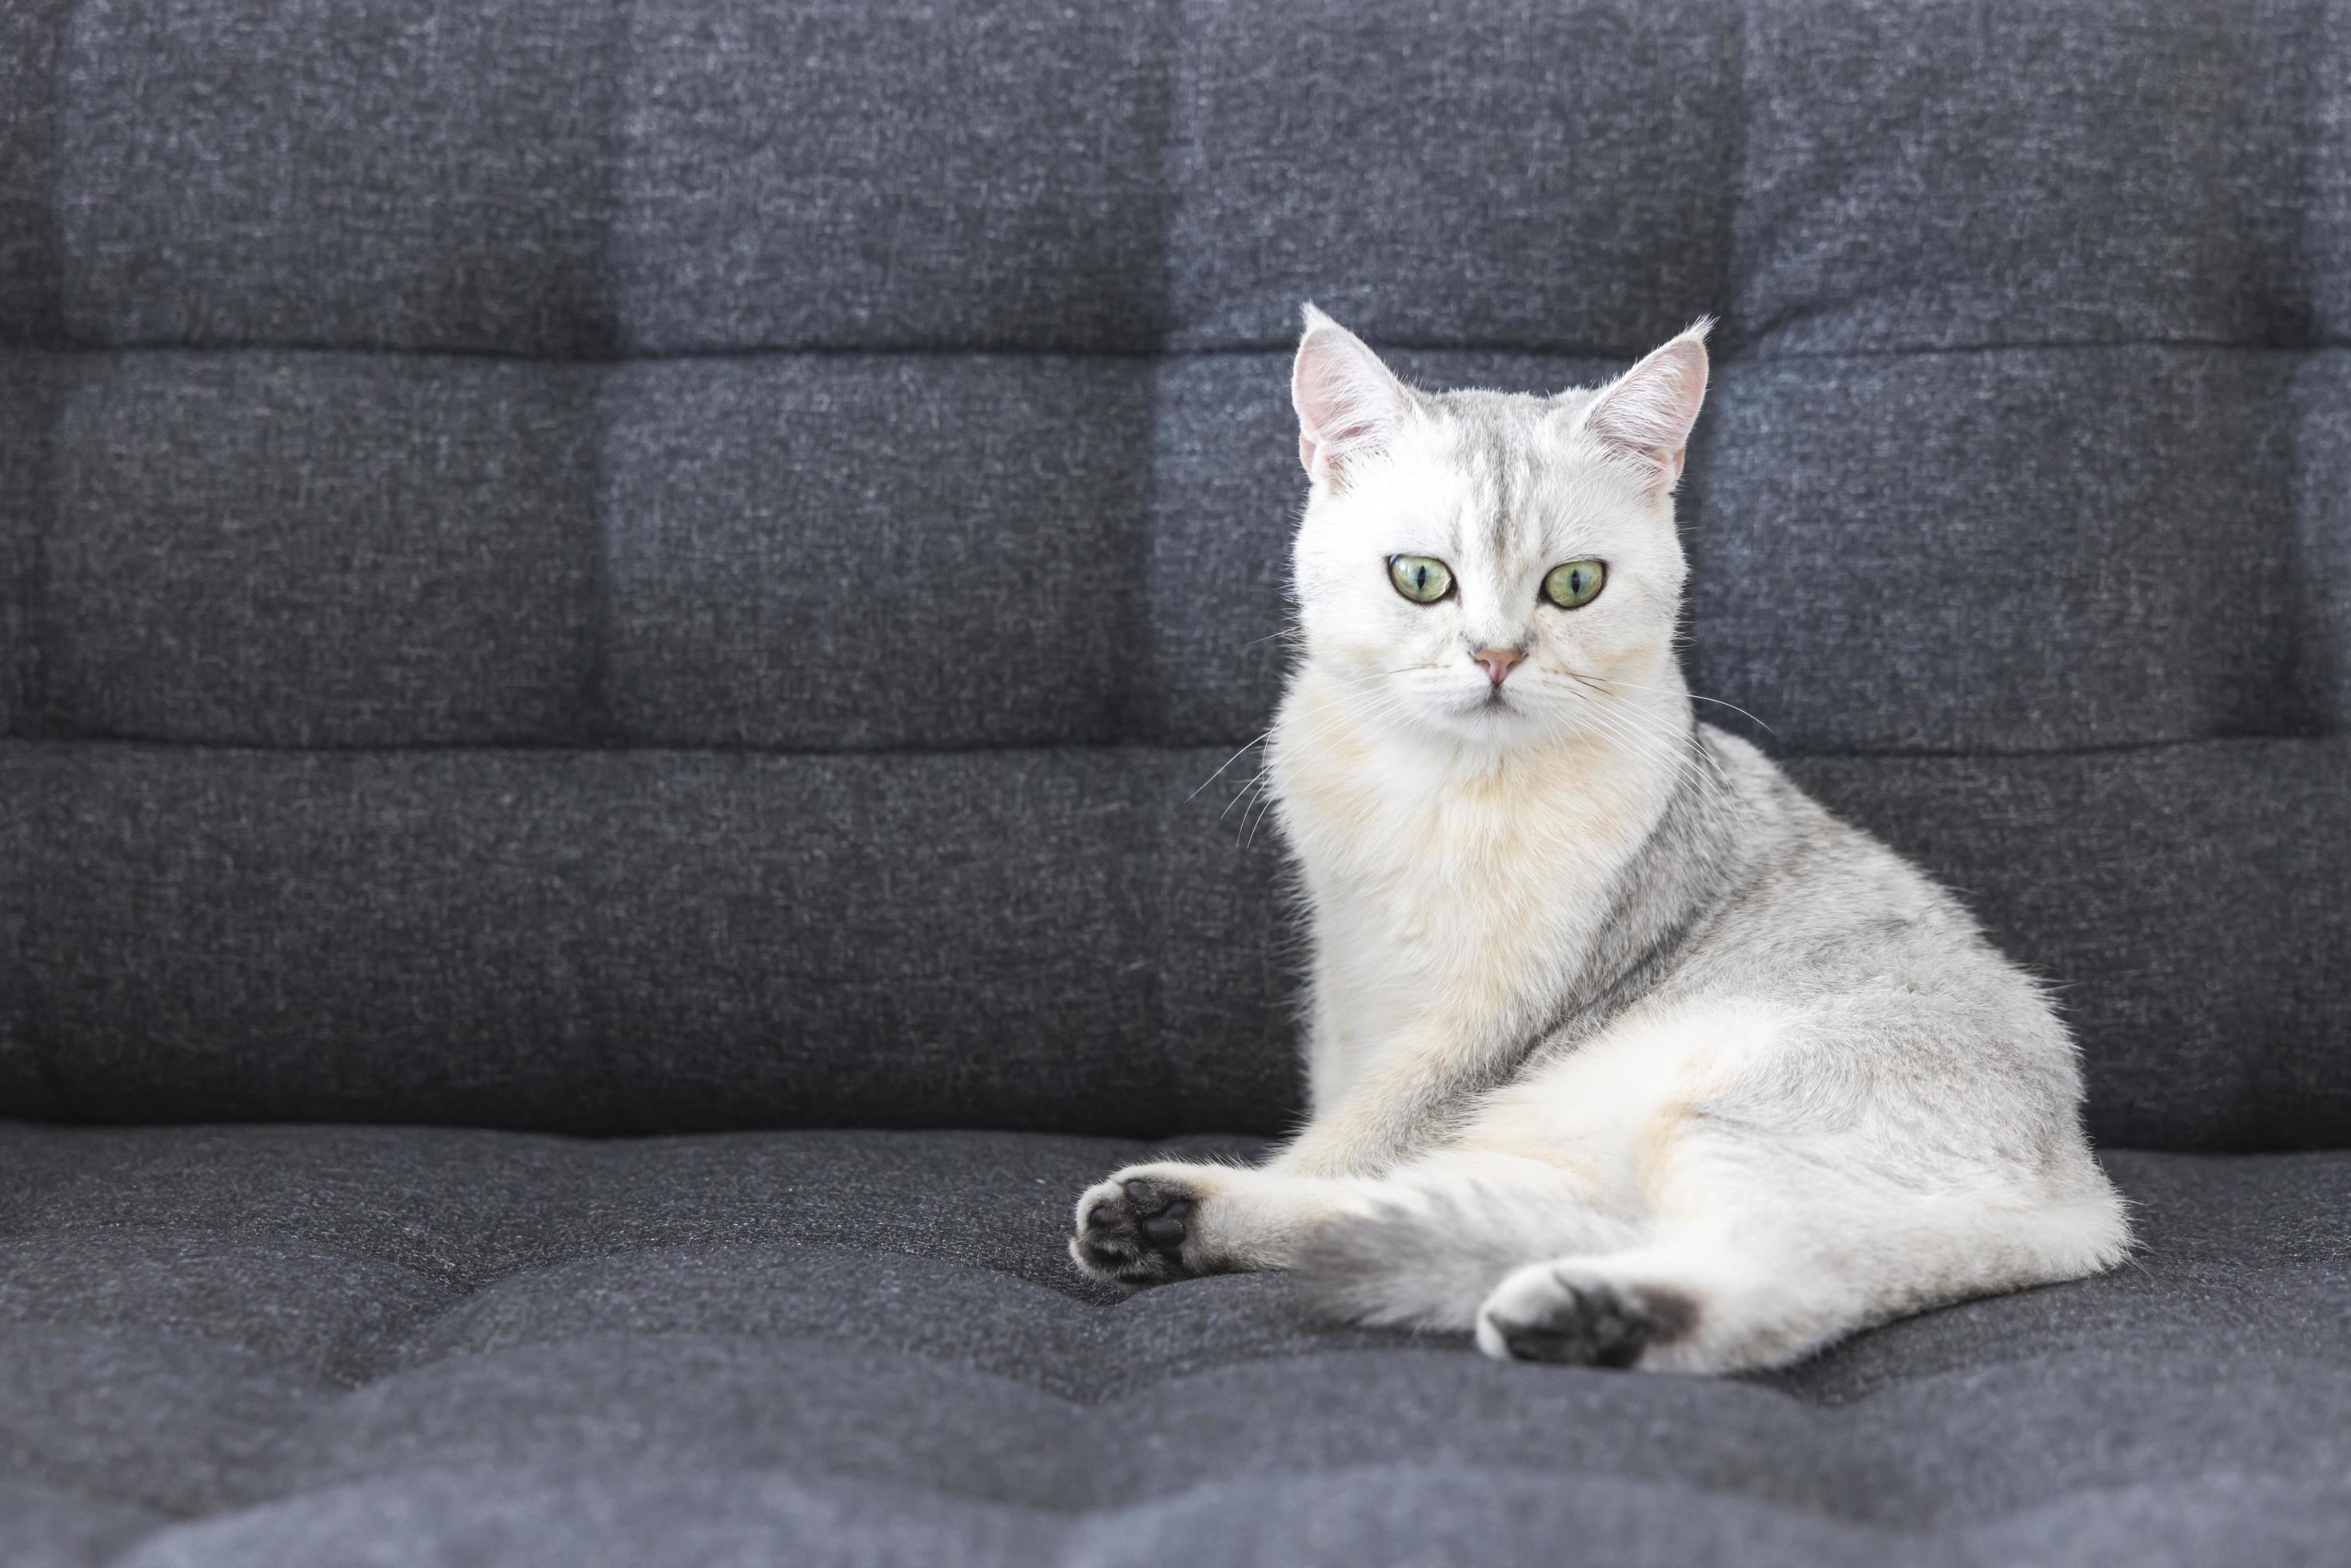 Cat cute with white short hair breed of British purebred. The Kitten pet is  adorable sitting on a sofa looking camera eyes yellow-green. Feline mammals  are fluffy and playful. 14025932 Stock Photo